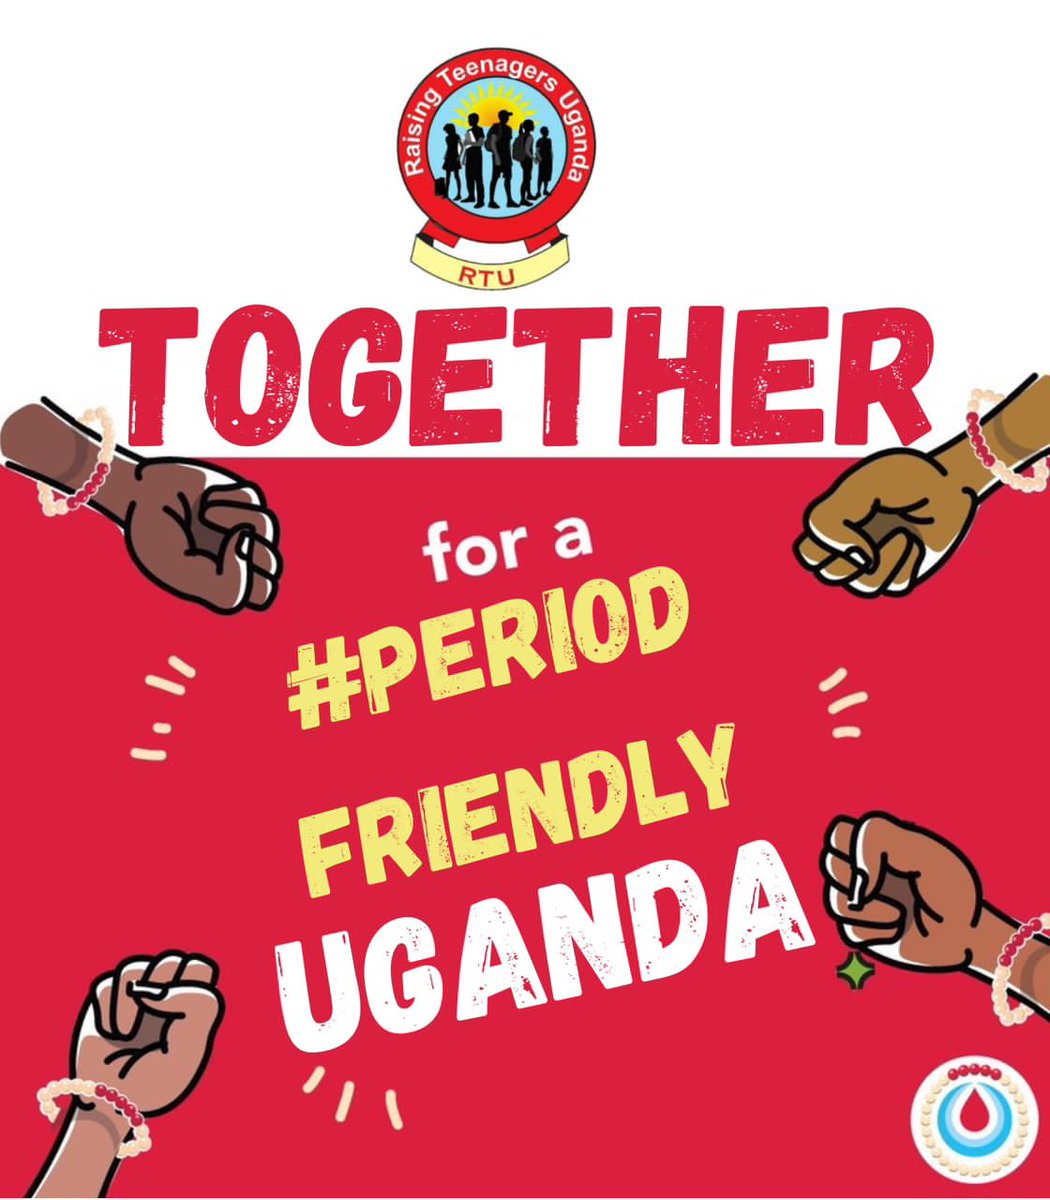 Menstruation impacts everyone, from health risks to missed school days. It's time to end the silence and foster a #PeriodFriendlyWorld. This July, join us for #Hike4GirlsUg. Let's come together to break the stigma and champion menstrual health.